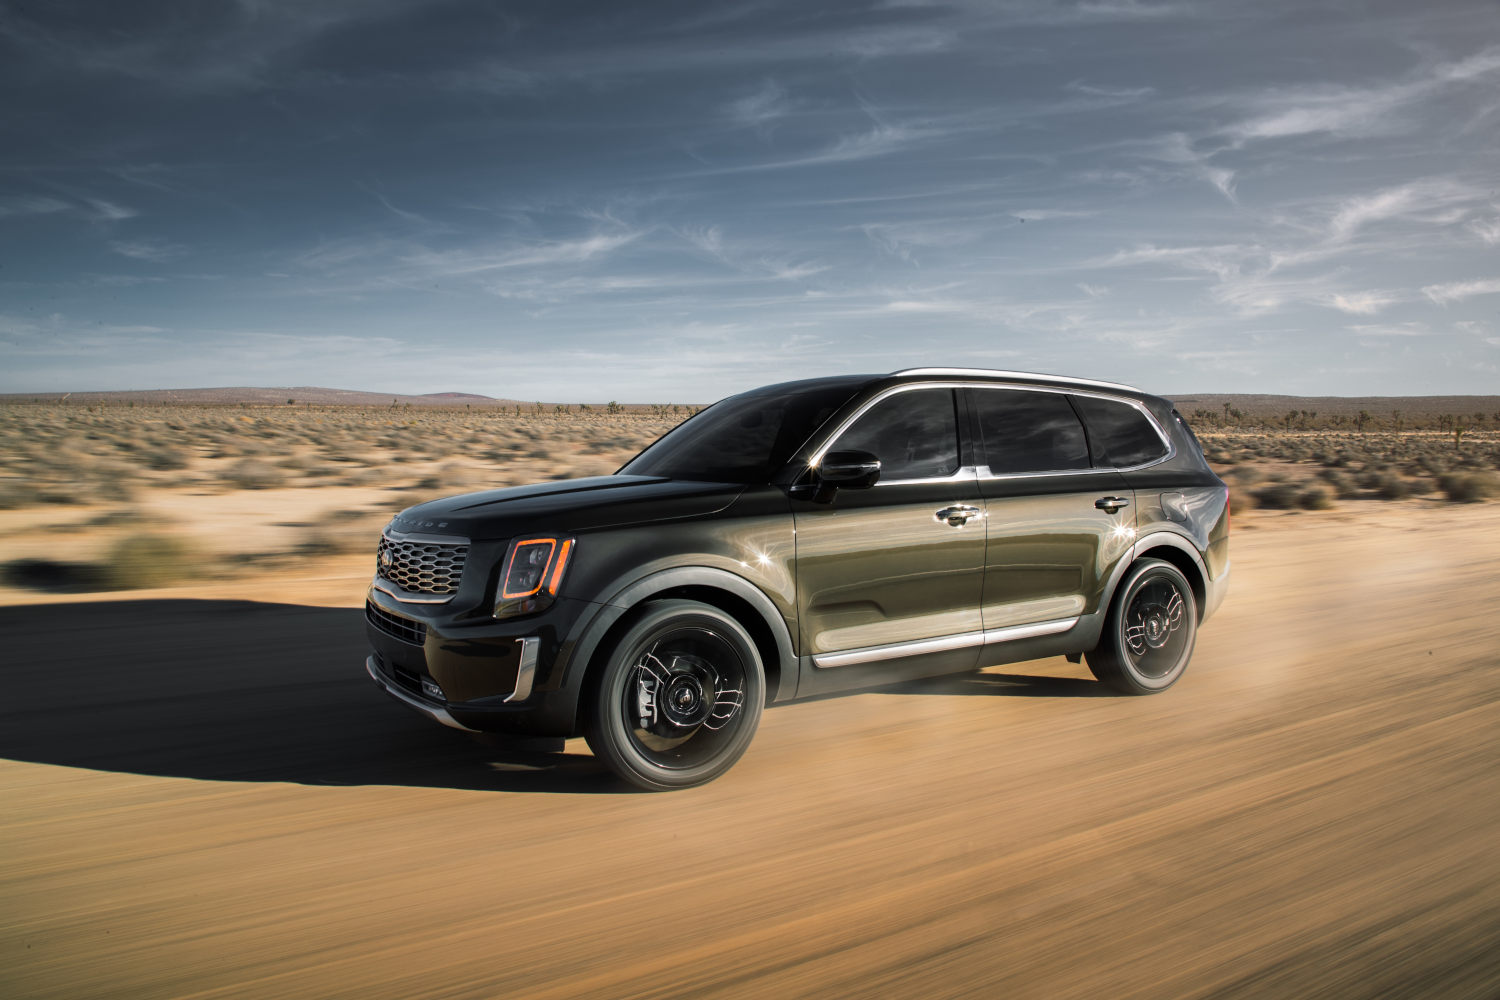 One of the best used SUVs is this Kia Telluride